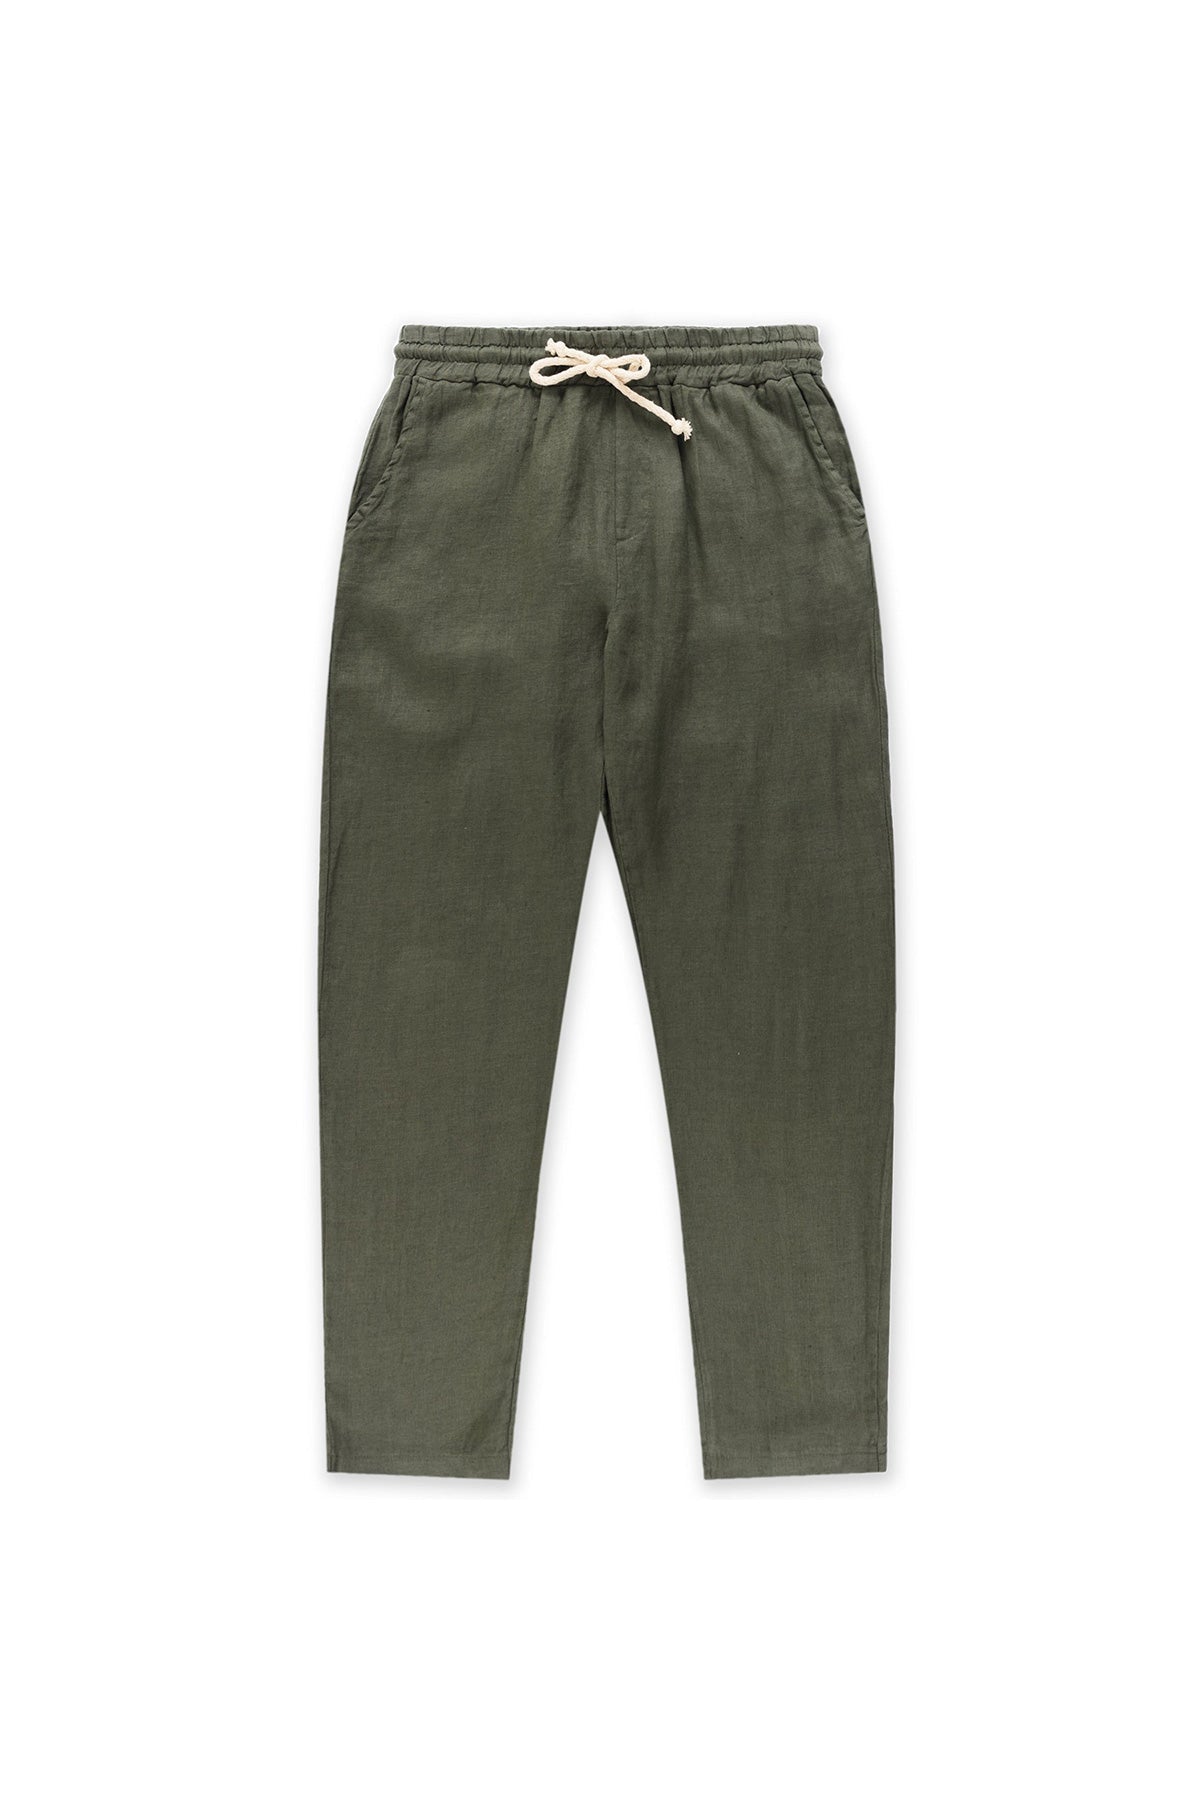 Olive Tailored Linen Pants - Polonio